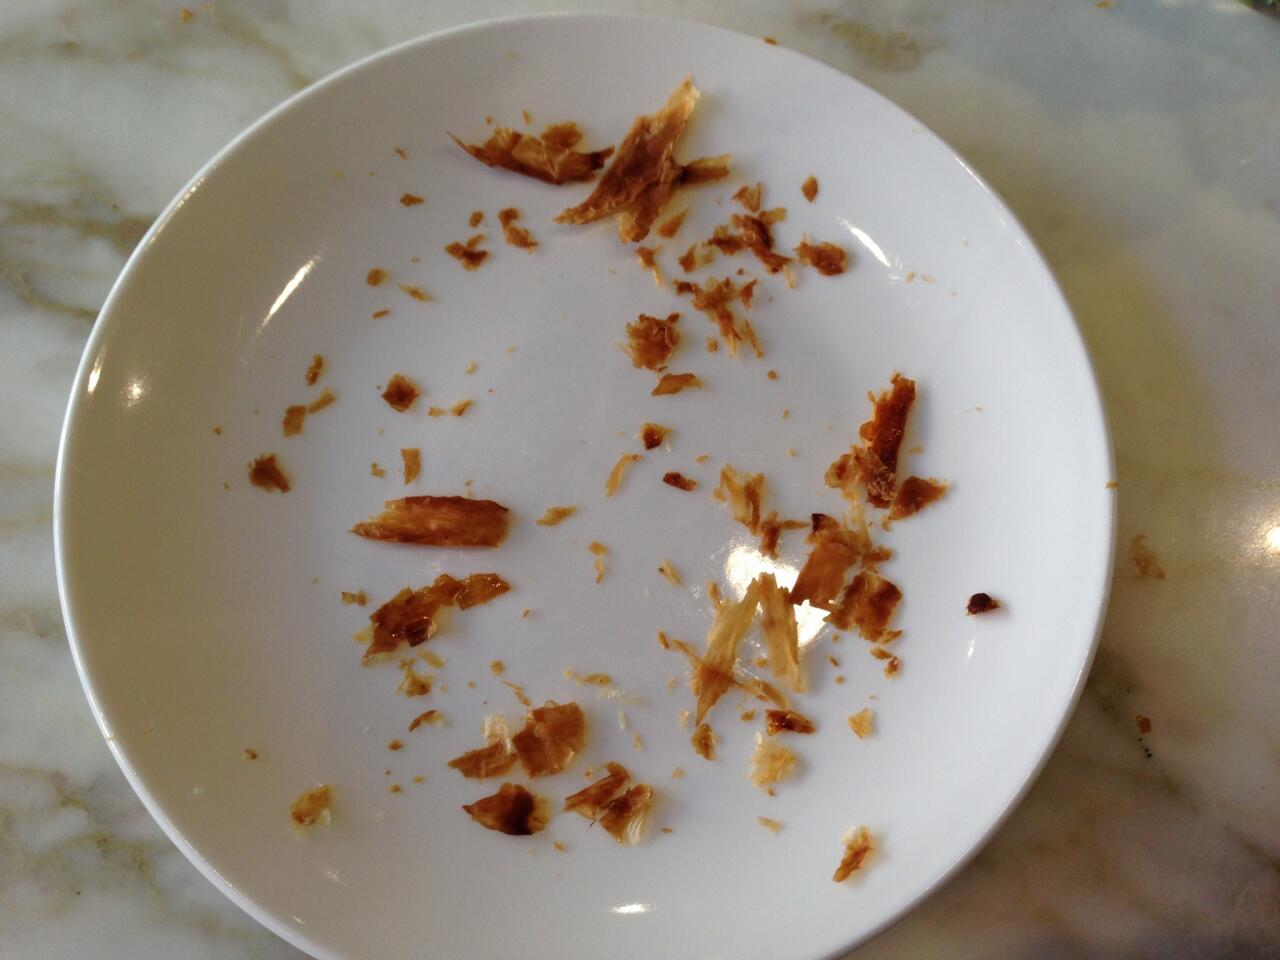 aftermath of the croissant at b. patisserie